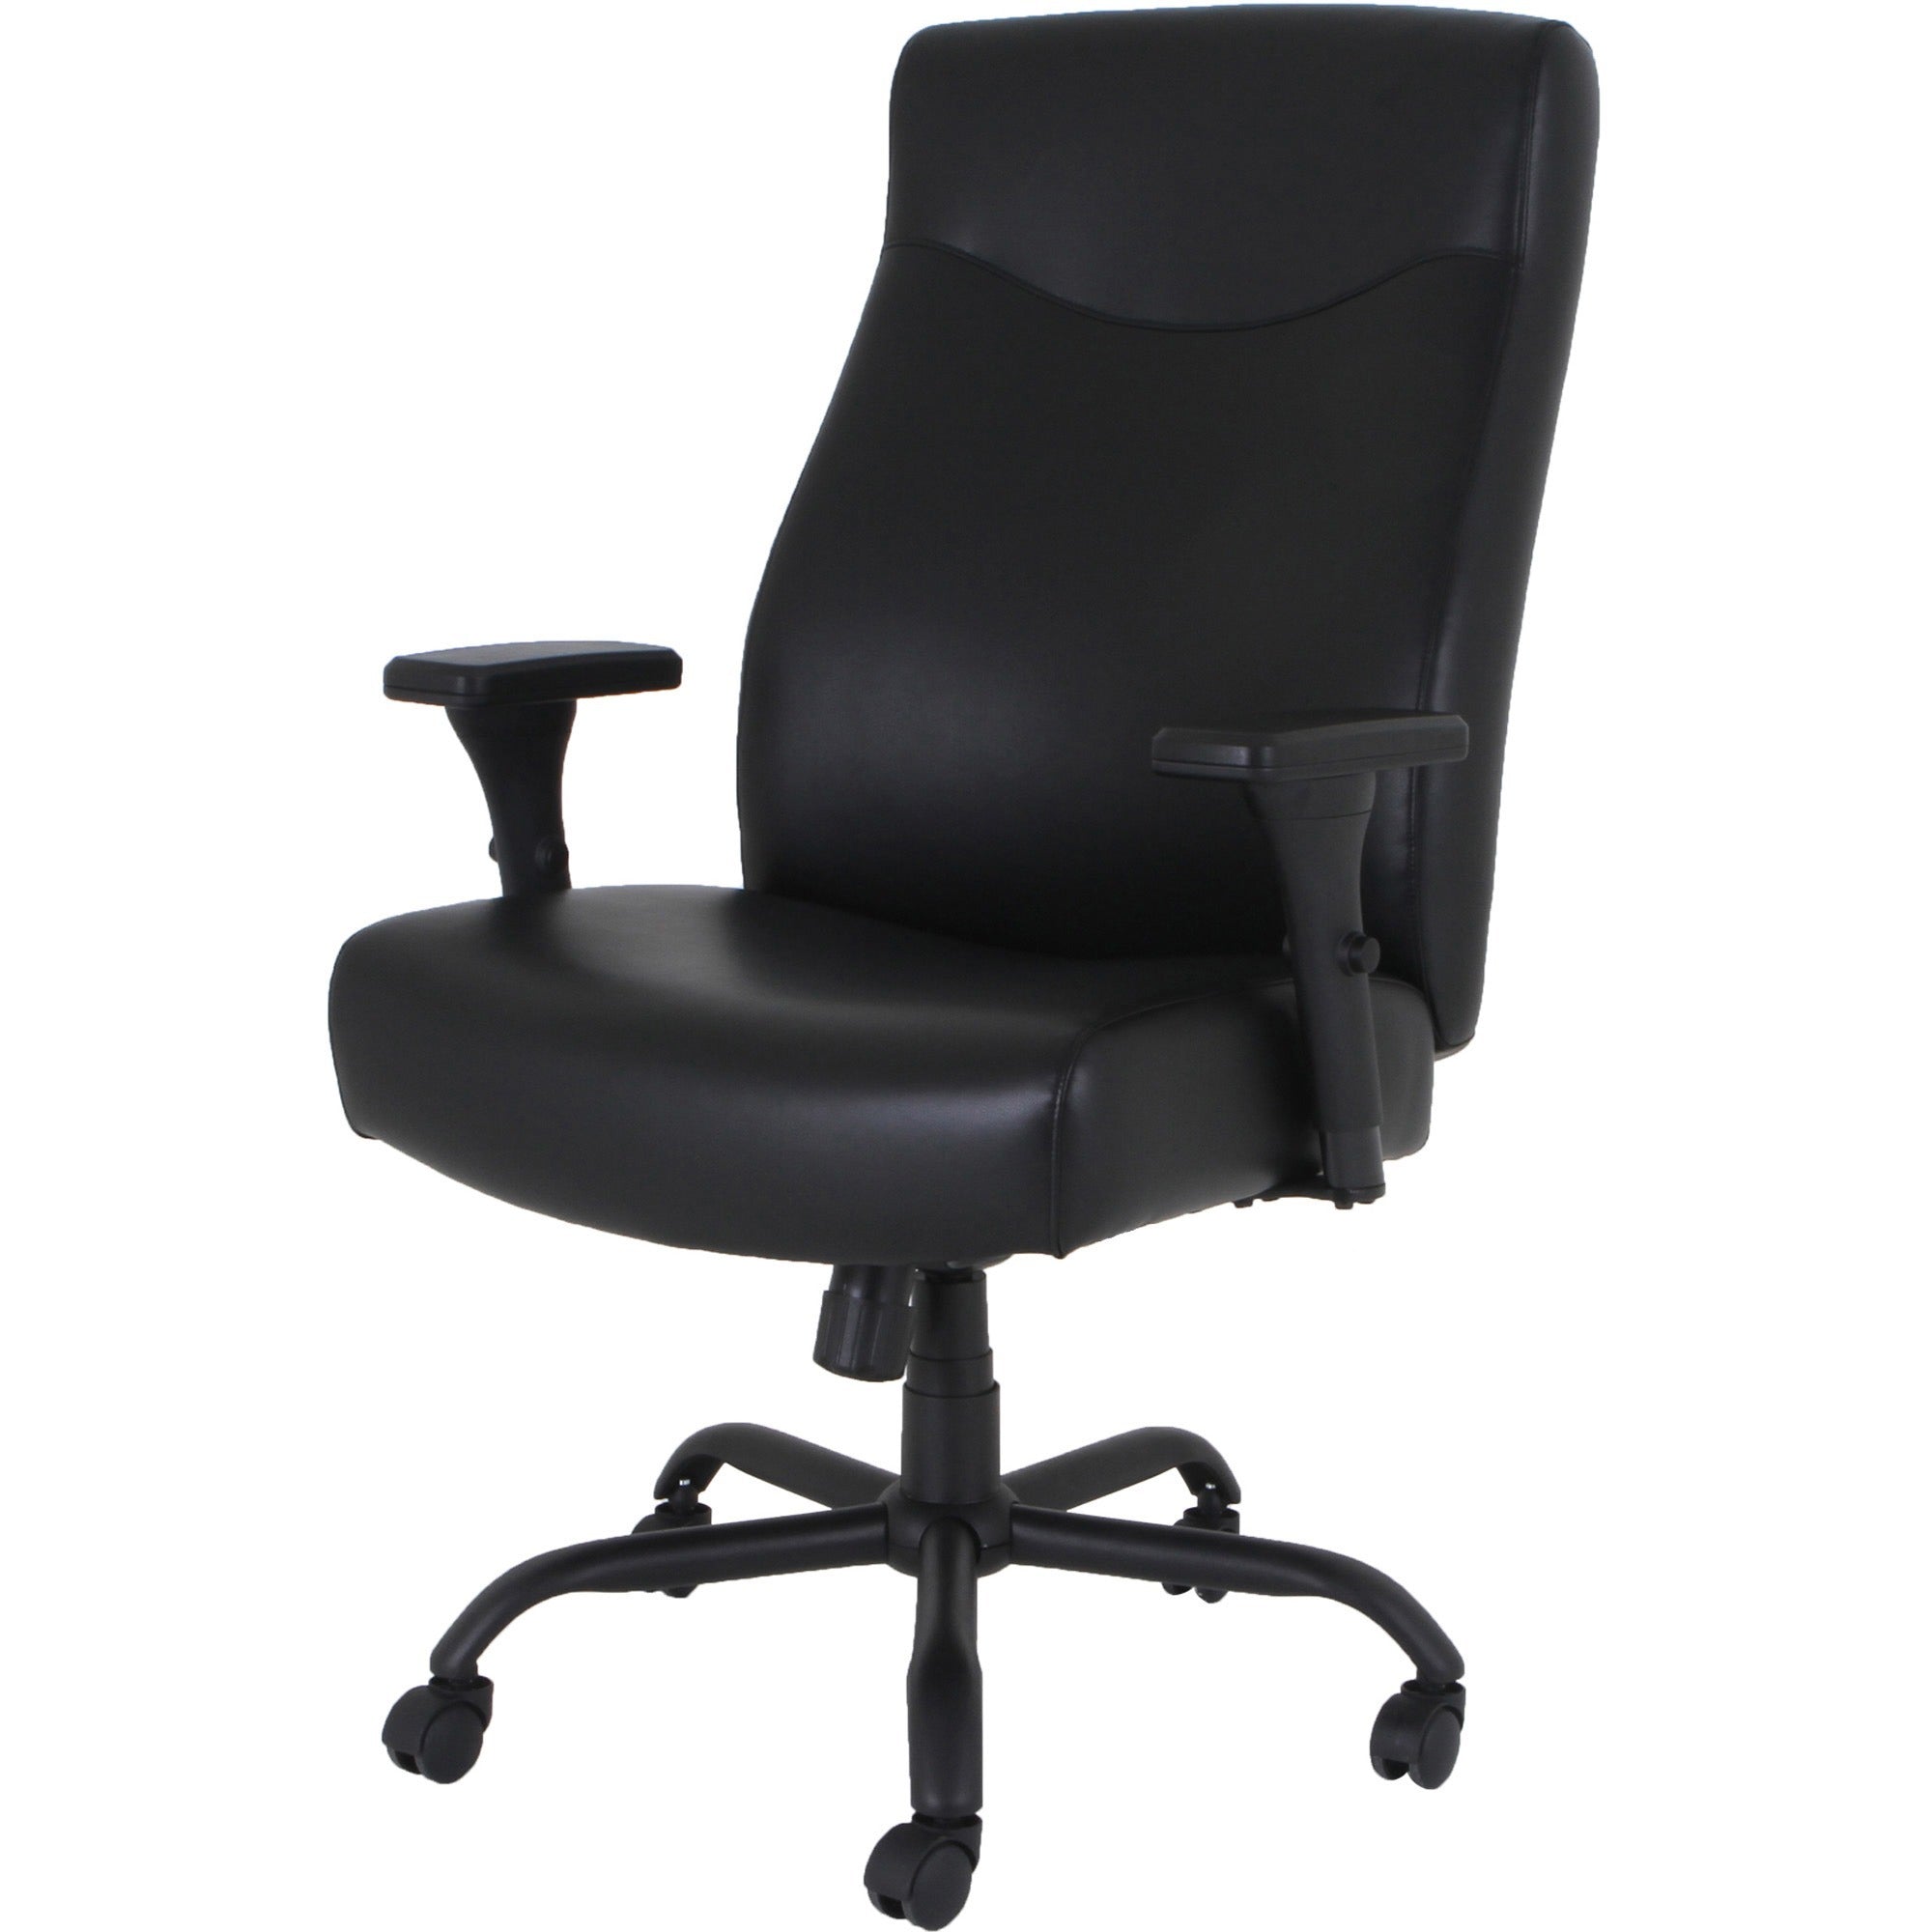 lorell-big-&-tall-executive-high-back-chair-with-adjustable-arms-black-bonded-leather-seat-black-bonded-leather-back-high-back-5-star-base-armrest-1-each_llr48846 - 4